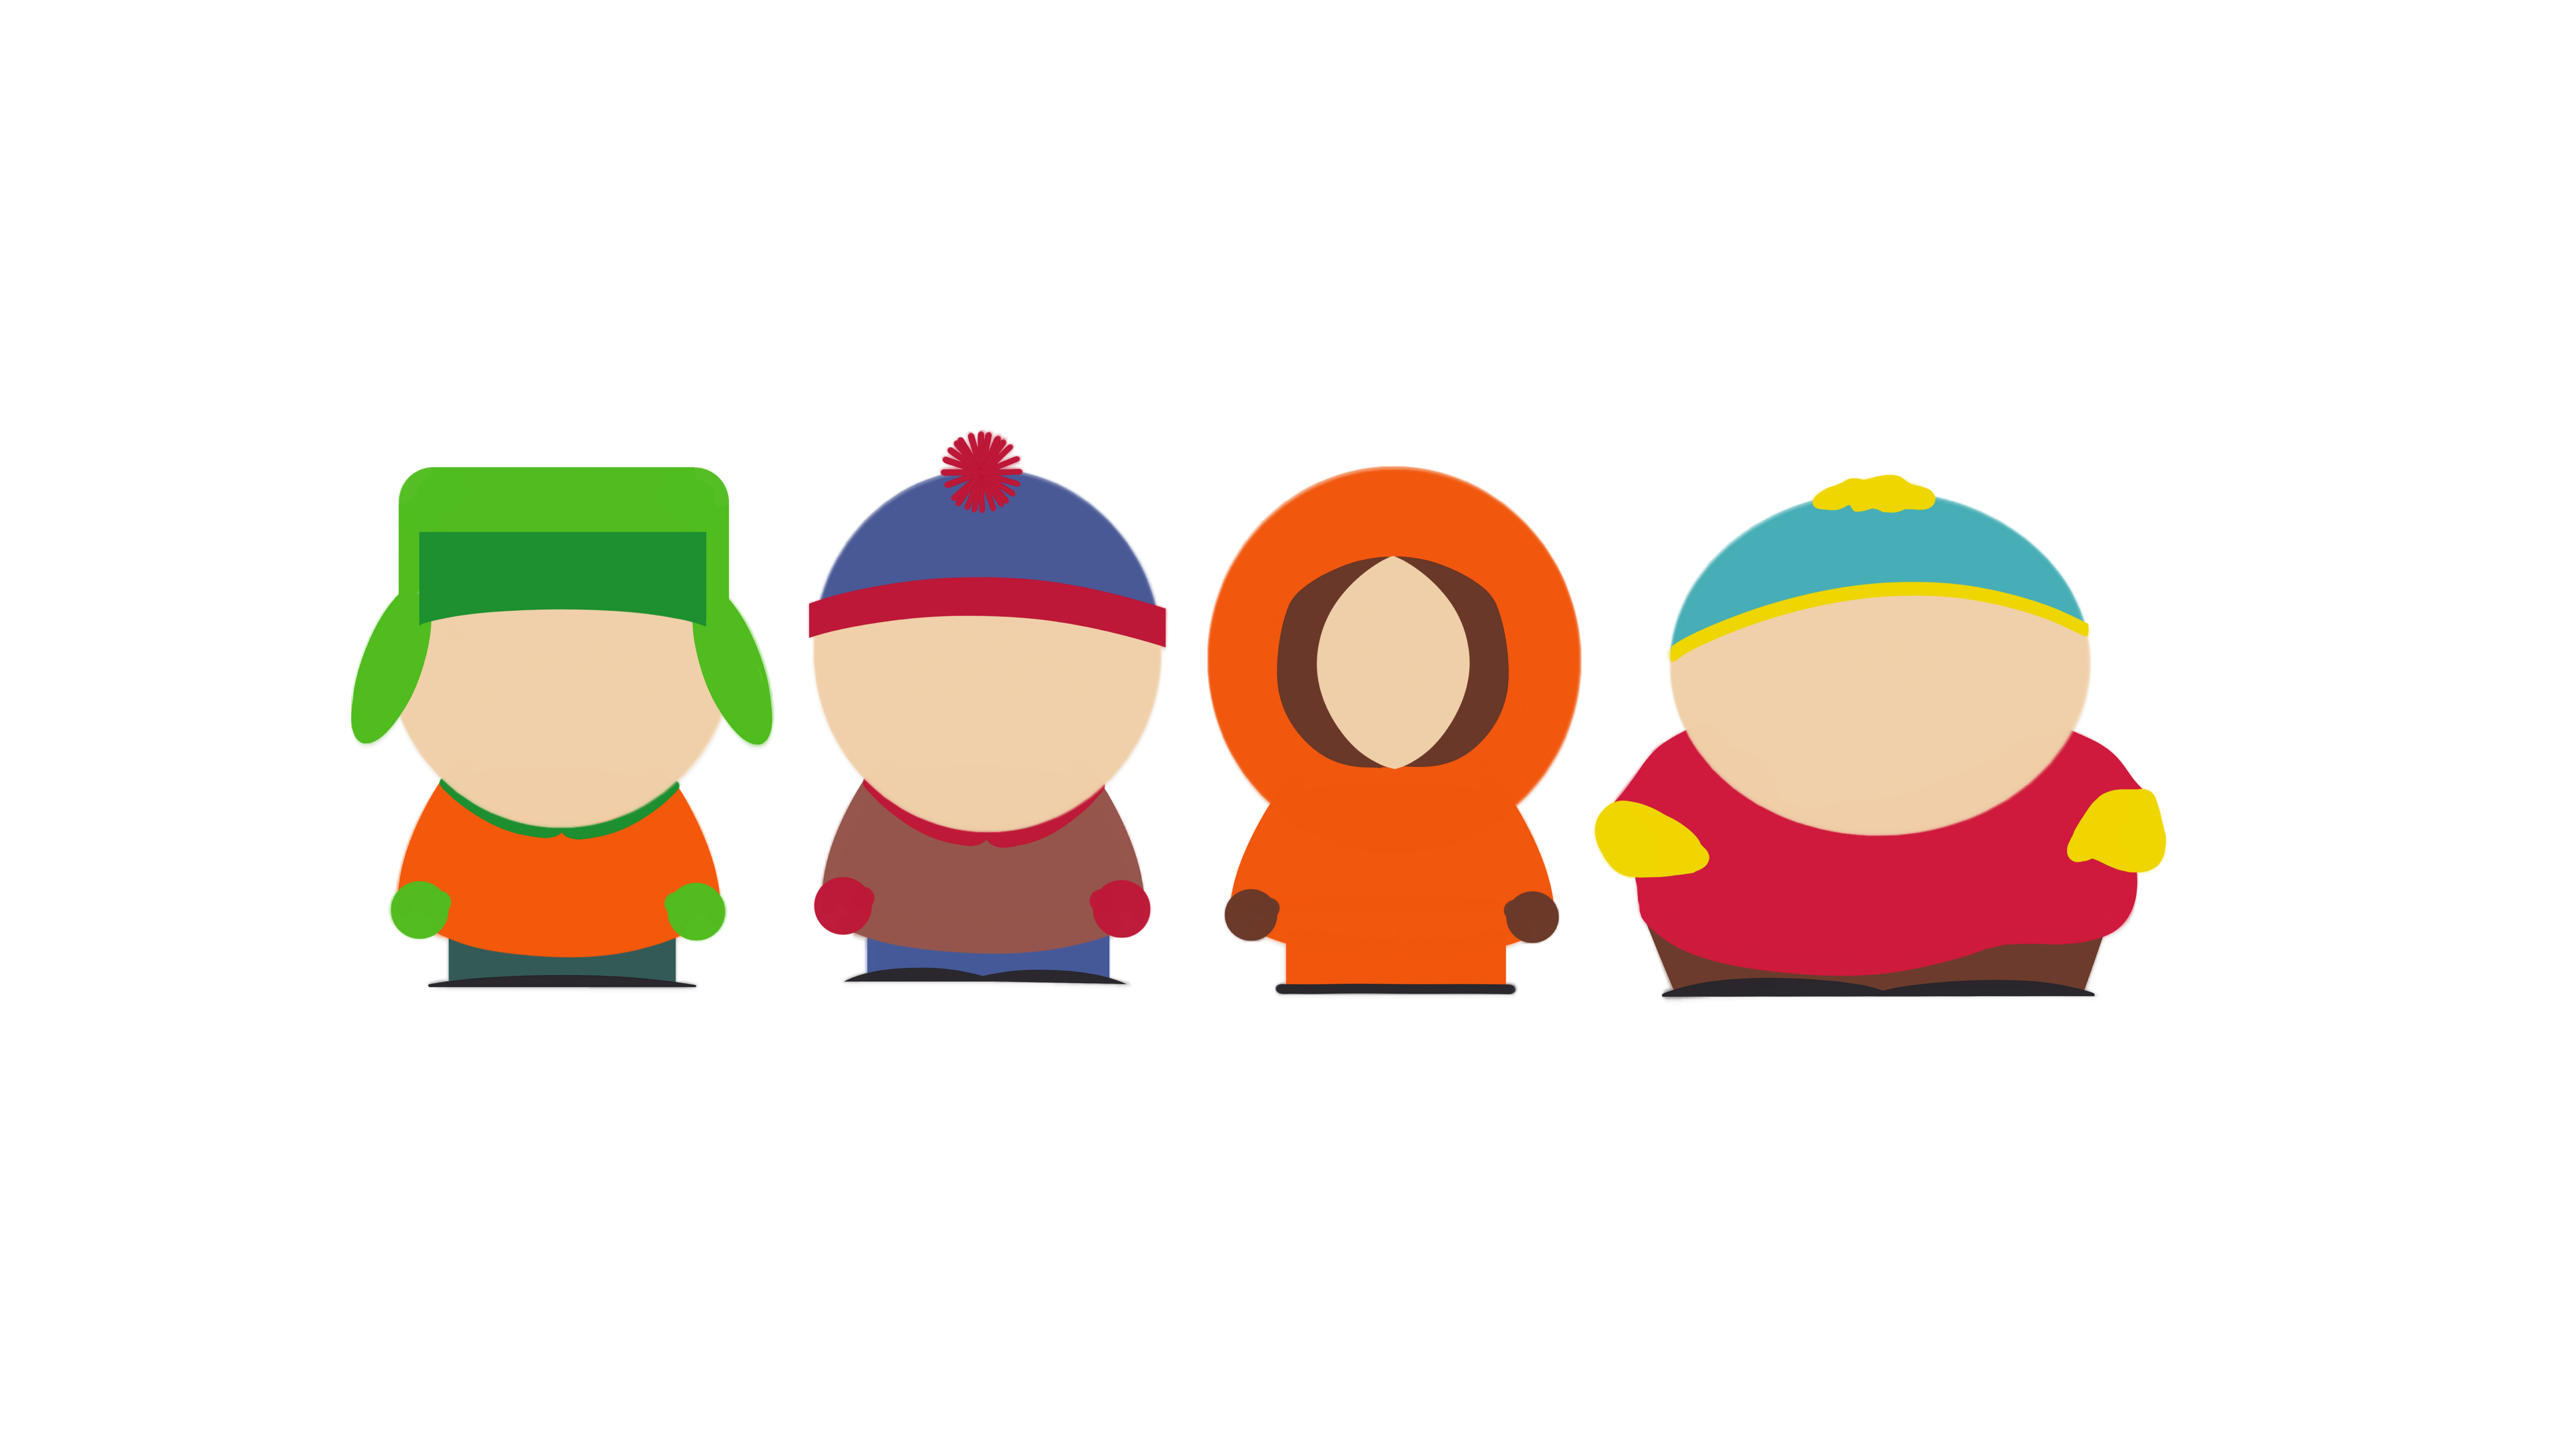 South Park Main Characters Minimalism, HD Tv Shows, 4k Wallpapers